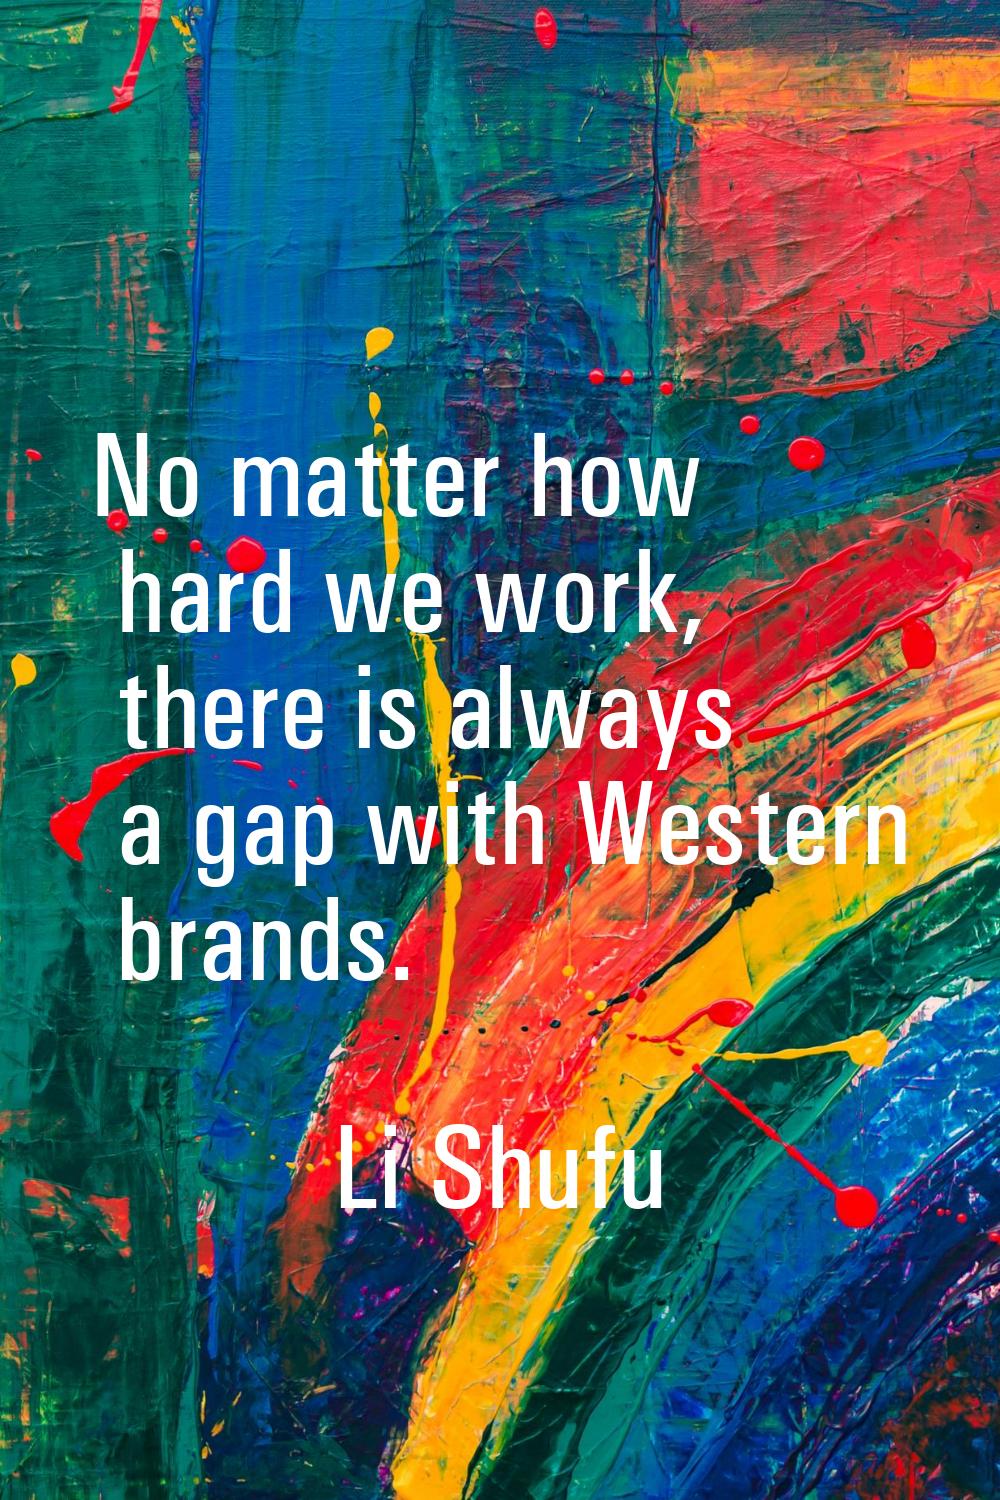 No matter how hard we work, there is always a gap with Western brands.